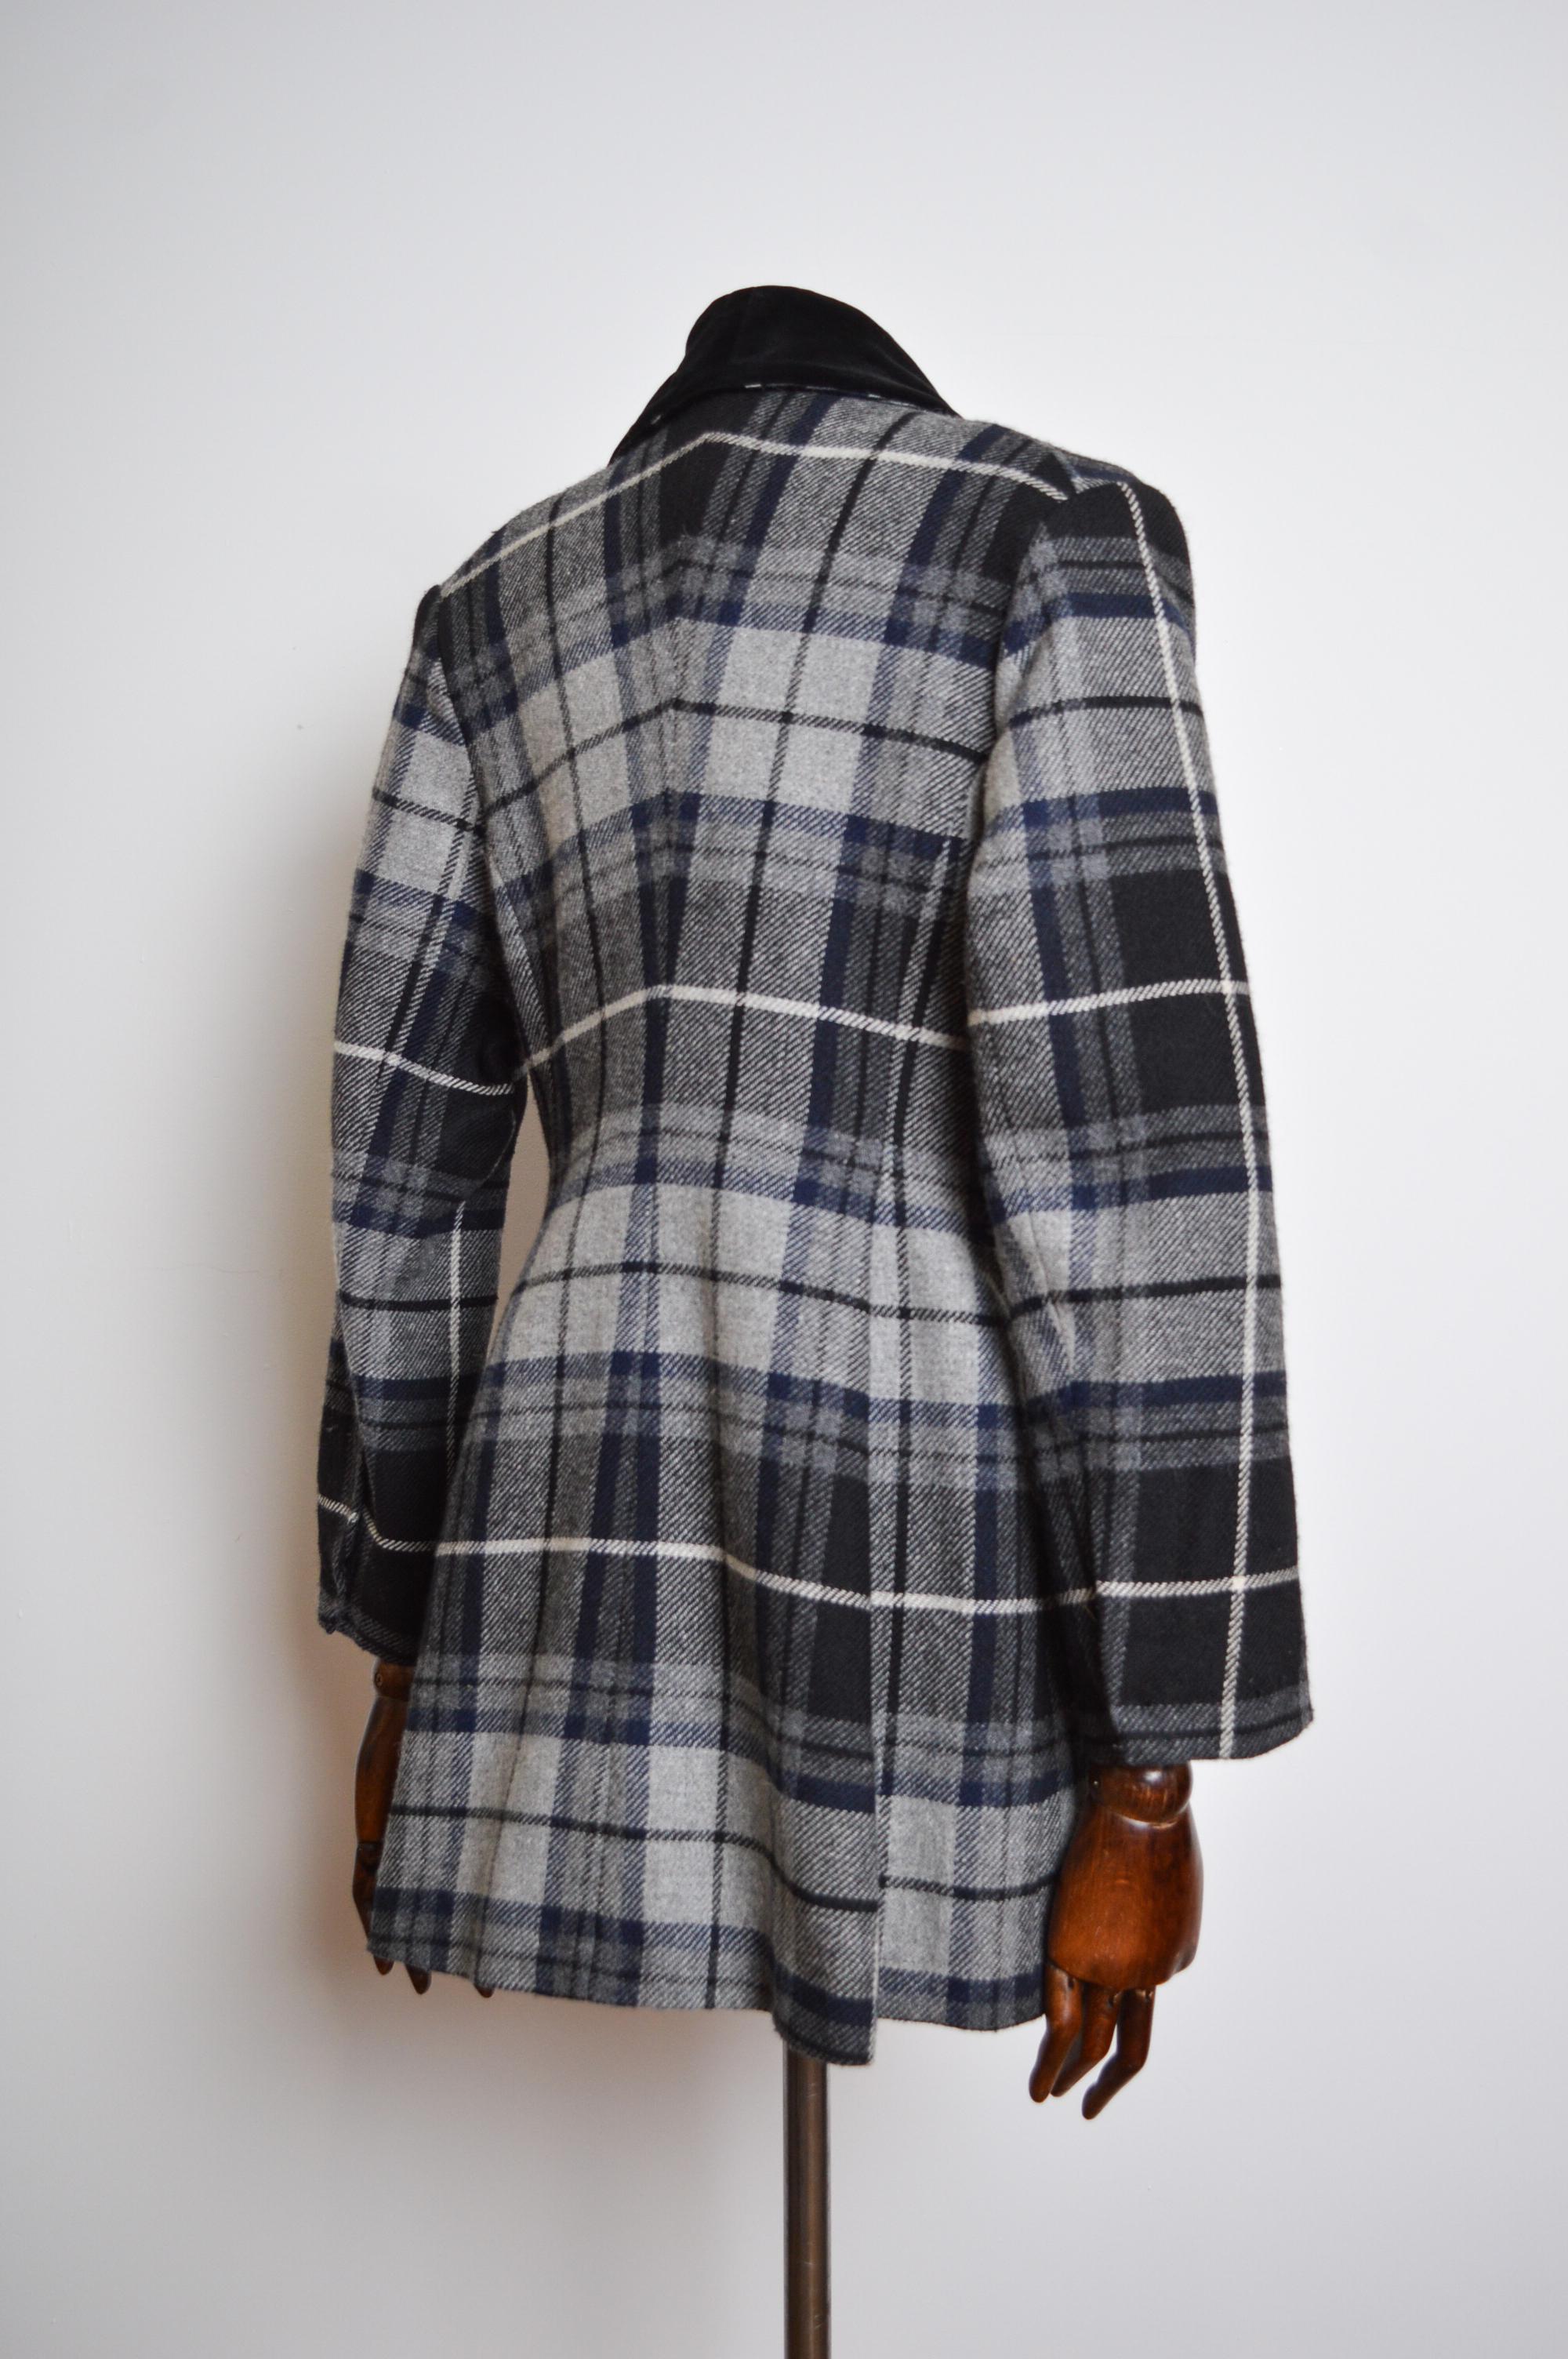 Rare Vivienne Westwood 3 Suisses AW 1995/ 1996 Collab Checked Tartan Wool Coat  For Sale 9